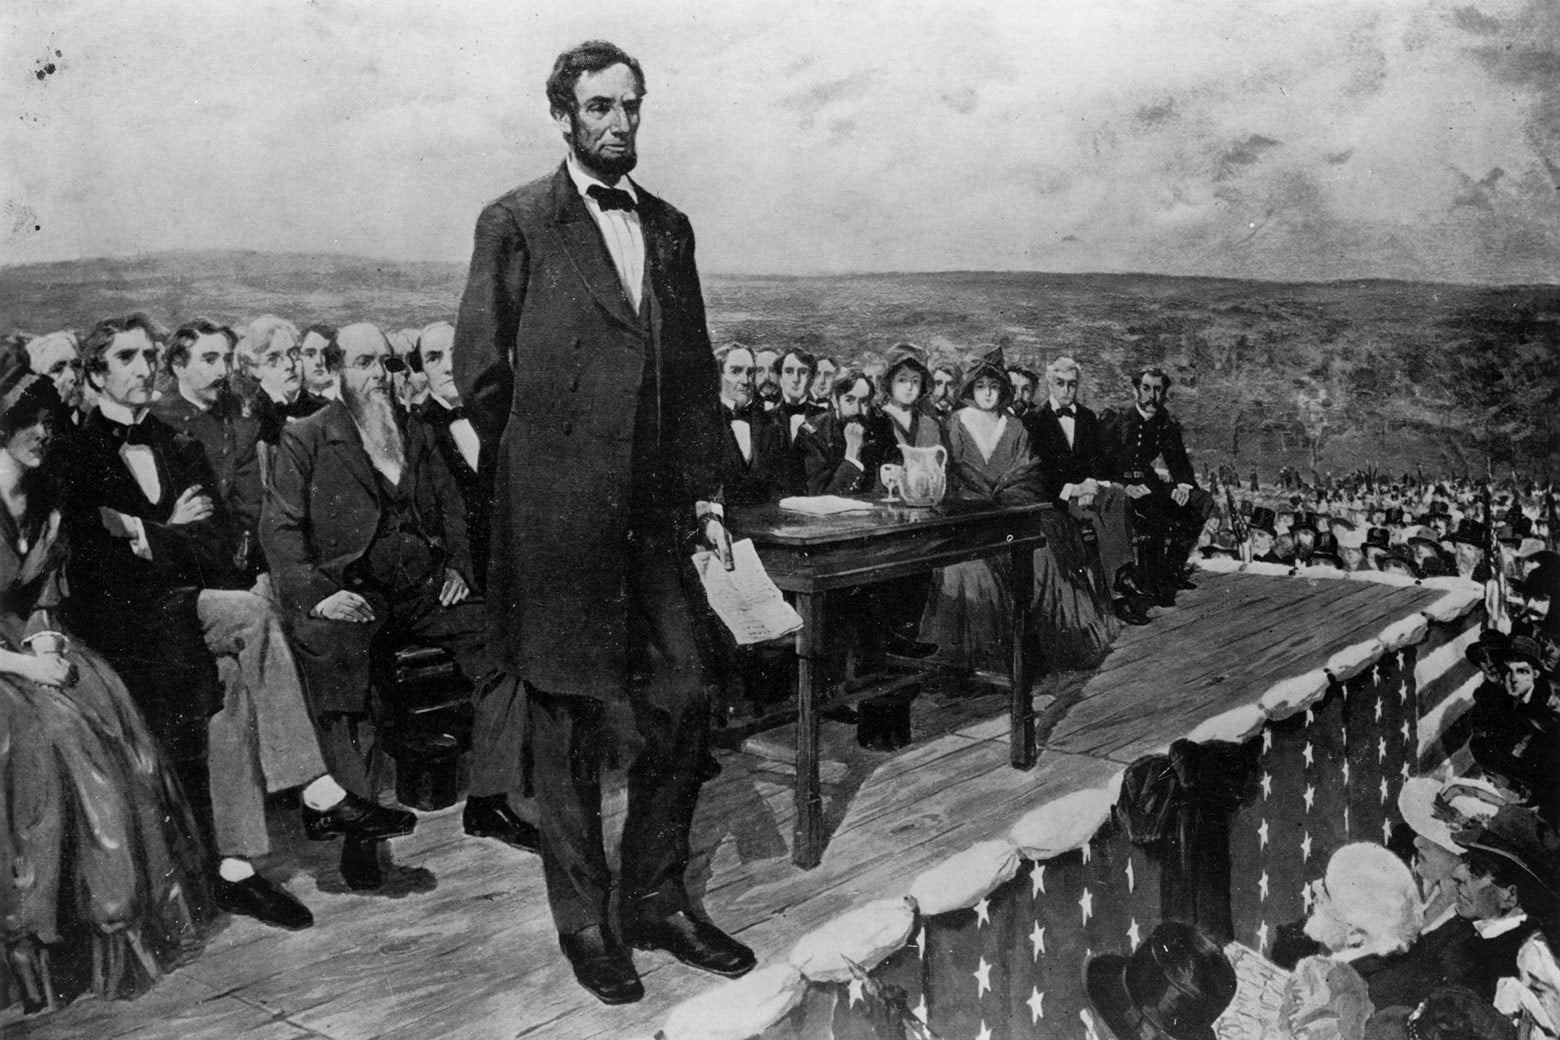 Painting of Abraham Lincoln delivering the Gettysburg Address. Holding a piece of paper, he stands on a raised platform with people seated behind him and standing below him.